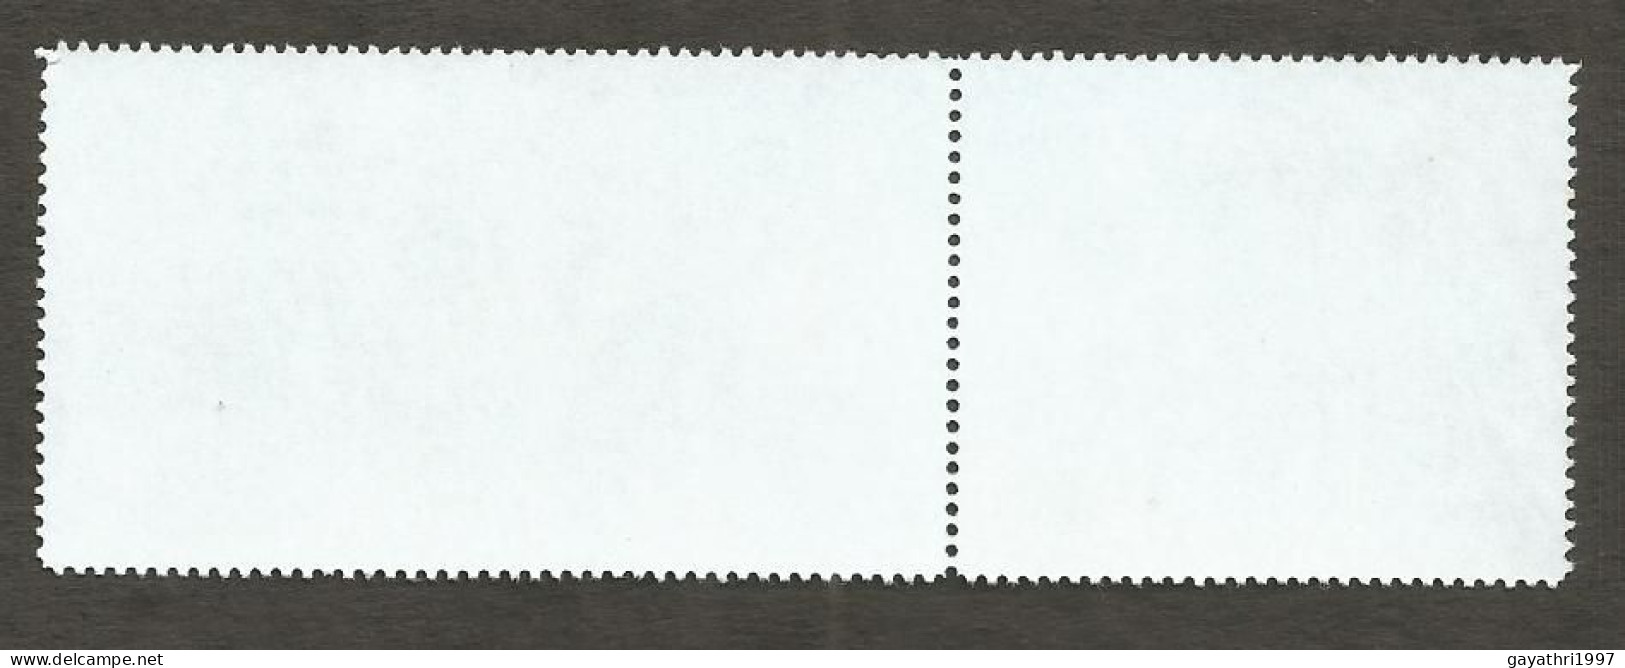 India 2008 Aga Khan Foundation Se-tenant Mint MNH Good Condition (PST - 113) - Unused Stamps